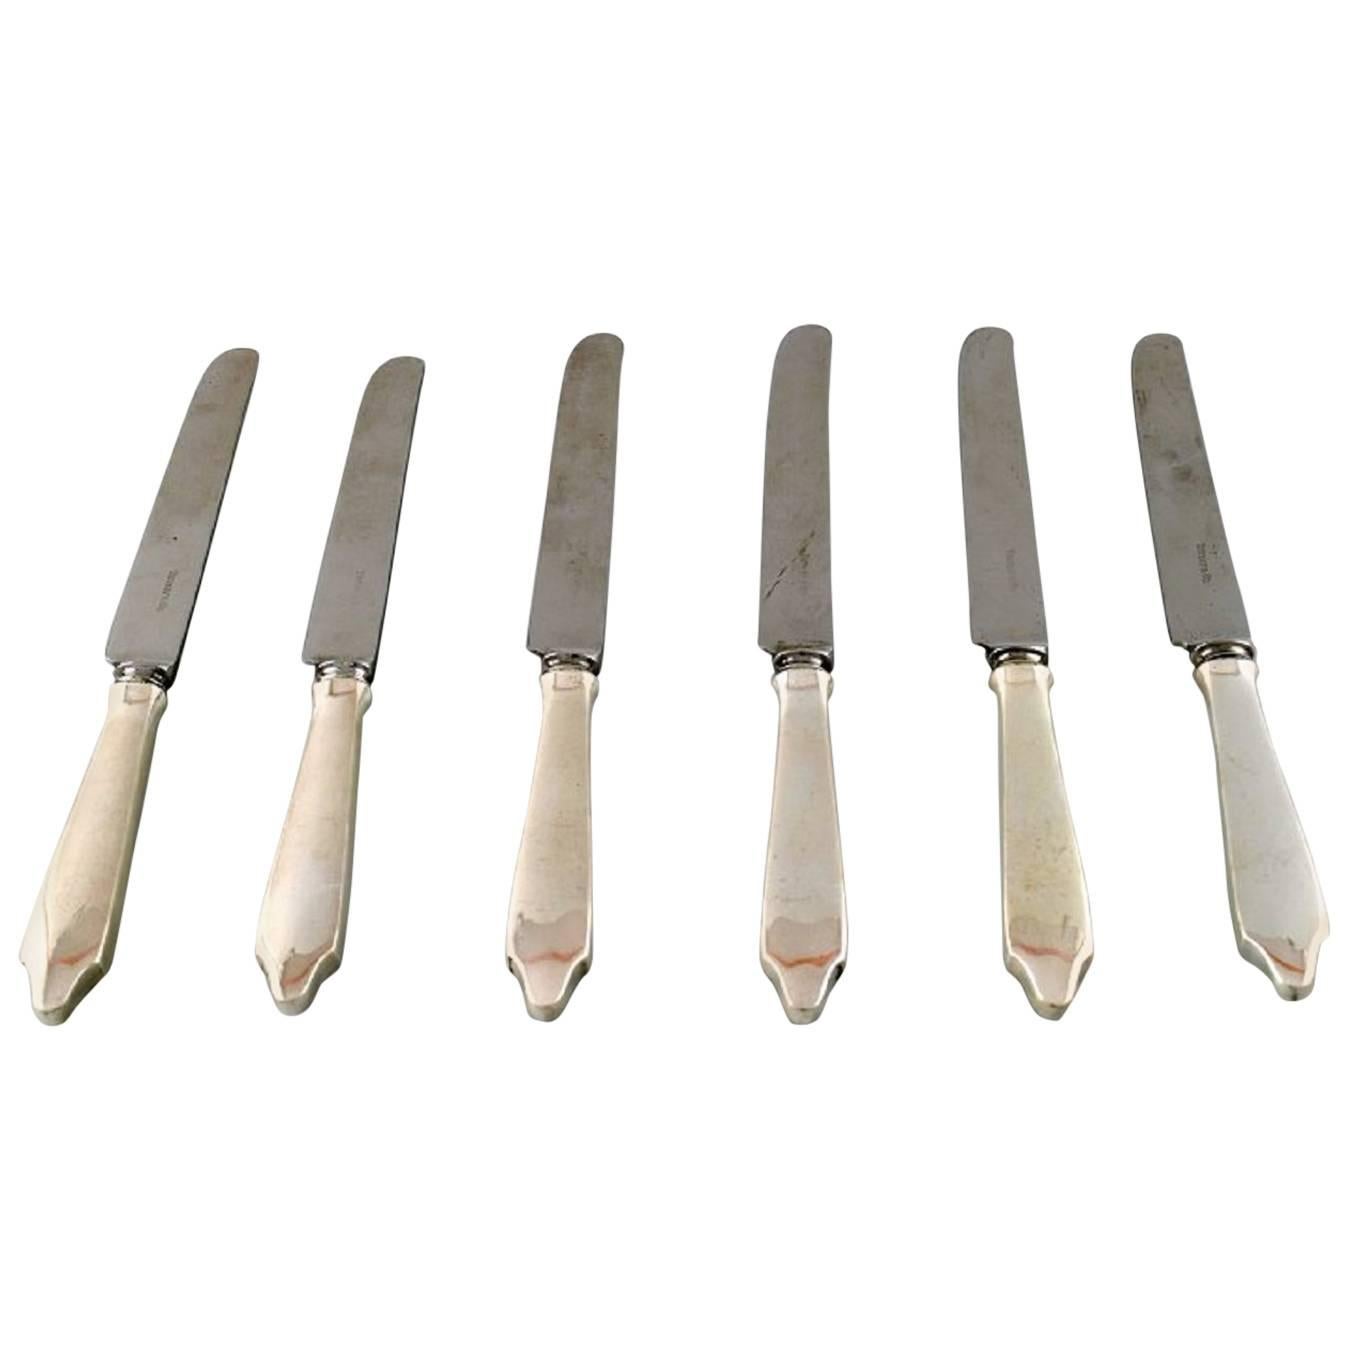 Six Knives by Tiffany & Co., New York, Dinner Knives in Silver